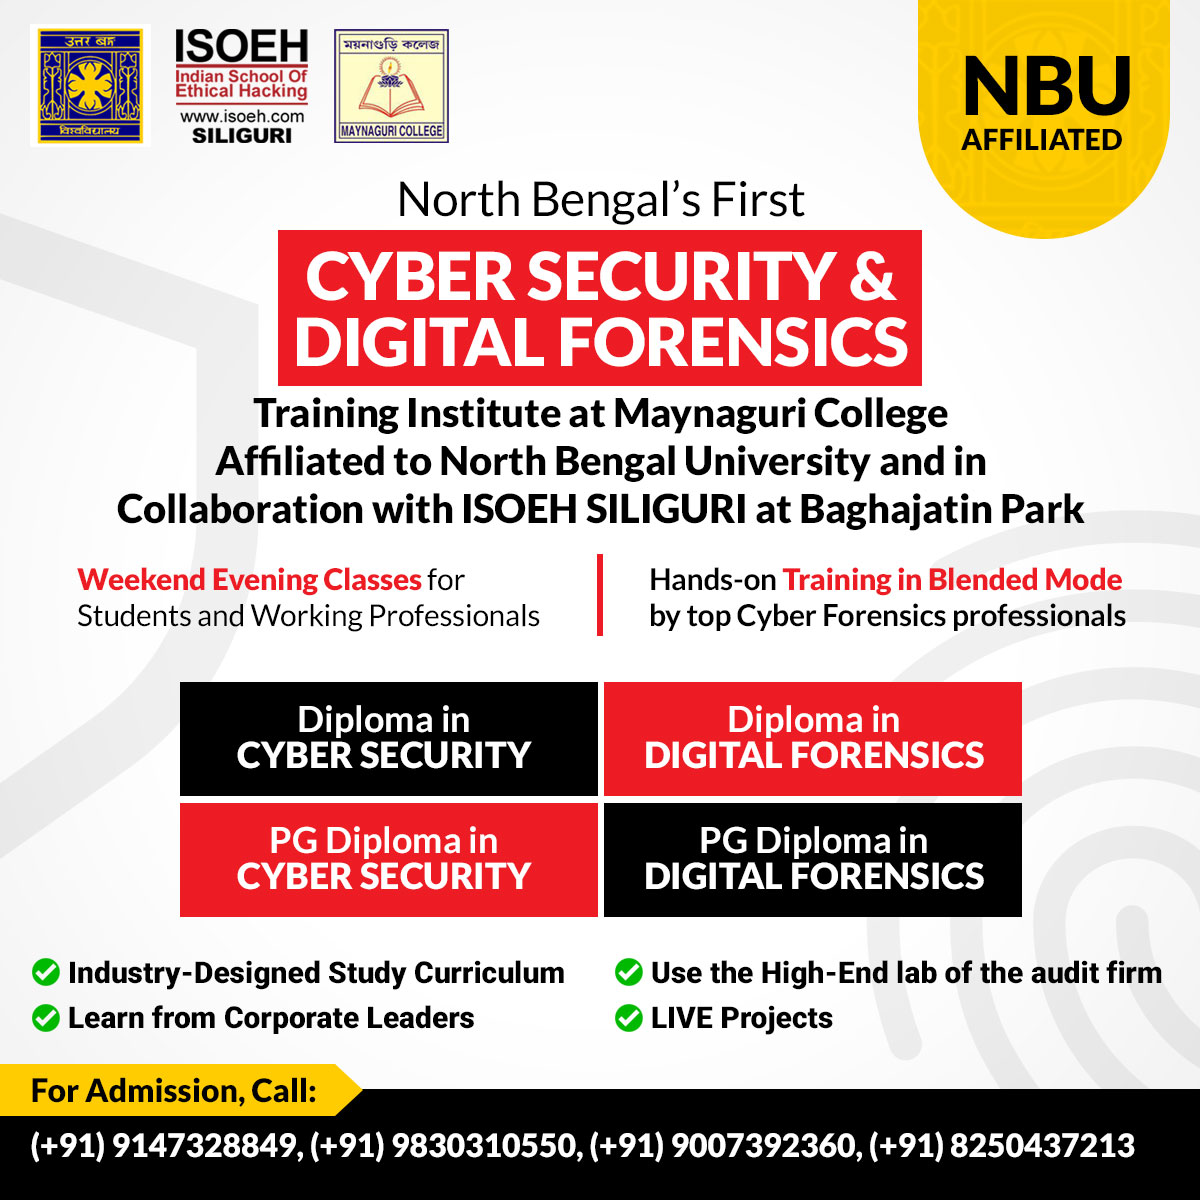 Cyber Security & Digital Forensics Training Institute at Maynaguri College Affiliated to North Bengal University and in Collaboration with ISOEH Siliguri at Baghajatin Park